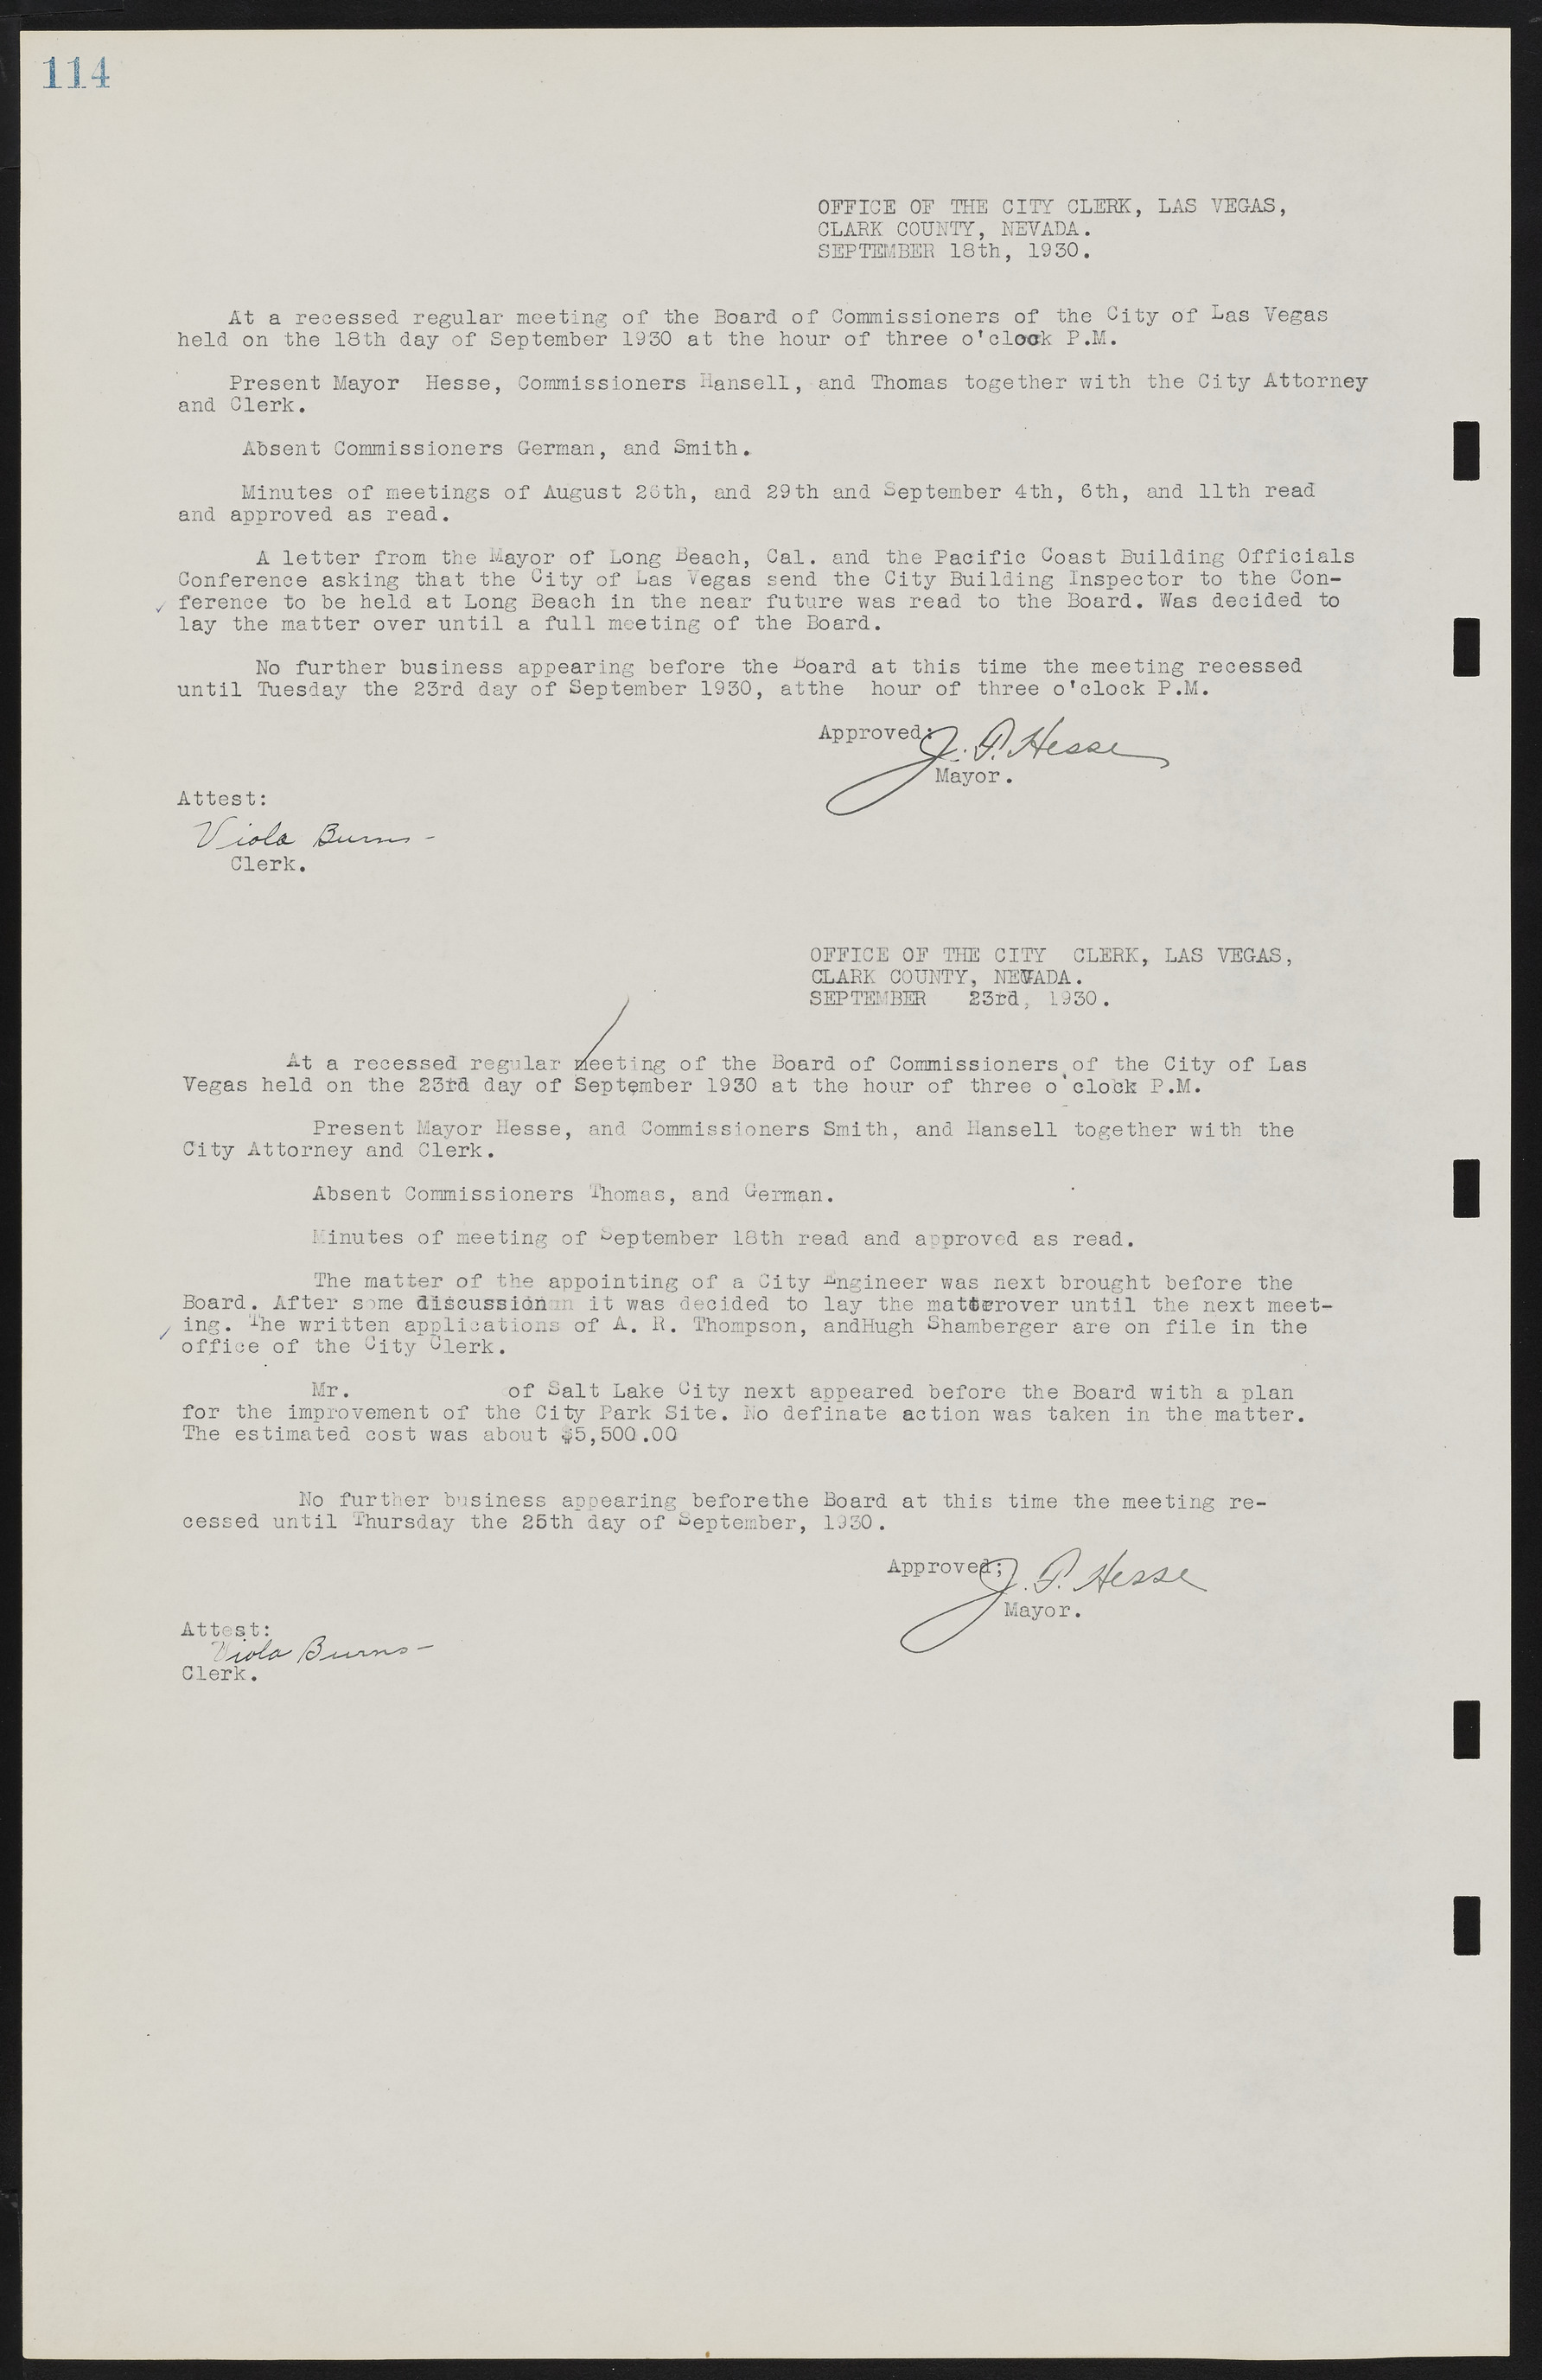 Las Vegas City Commission Minutes, May 14, 1929 to February 11, 1937, lvc000003-120